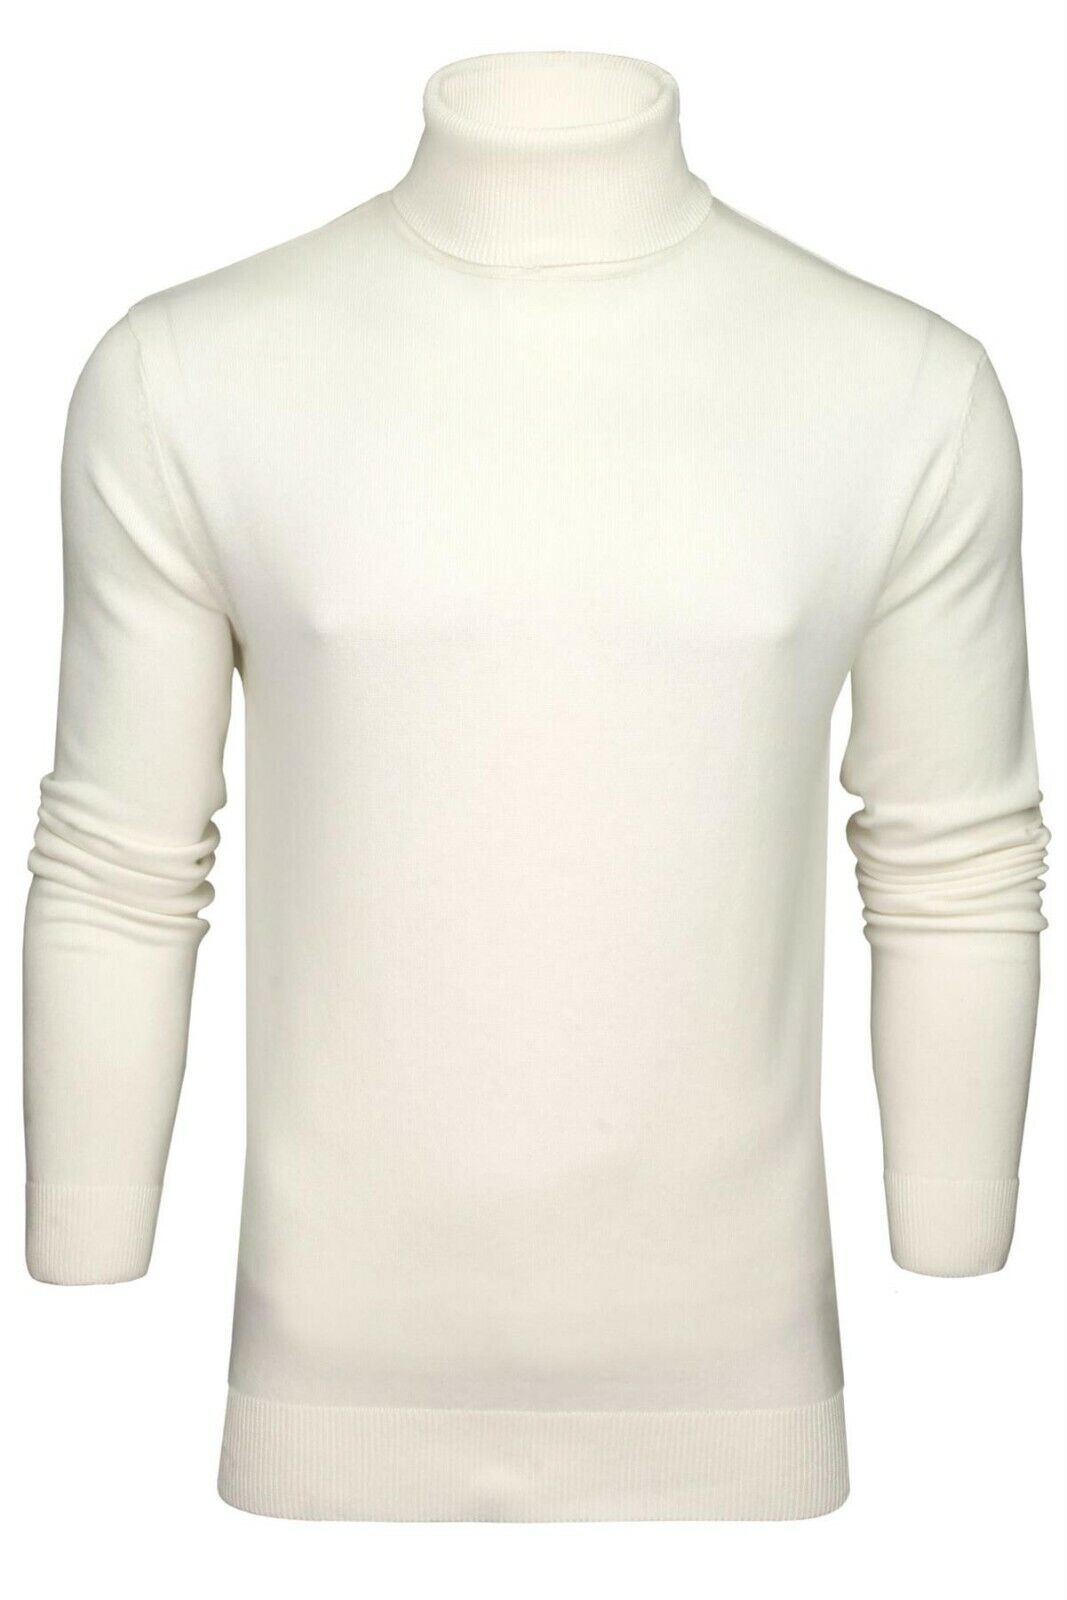 Mens Turtle Neck Jumper by Brave Soul Knitted Long Sleeve Roll Sweater Pullover